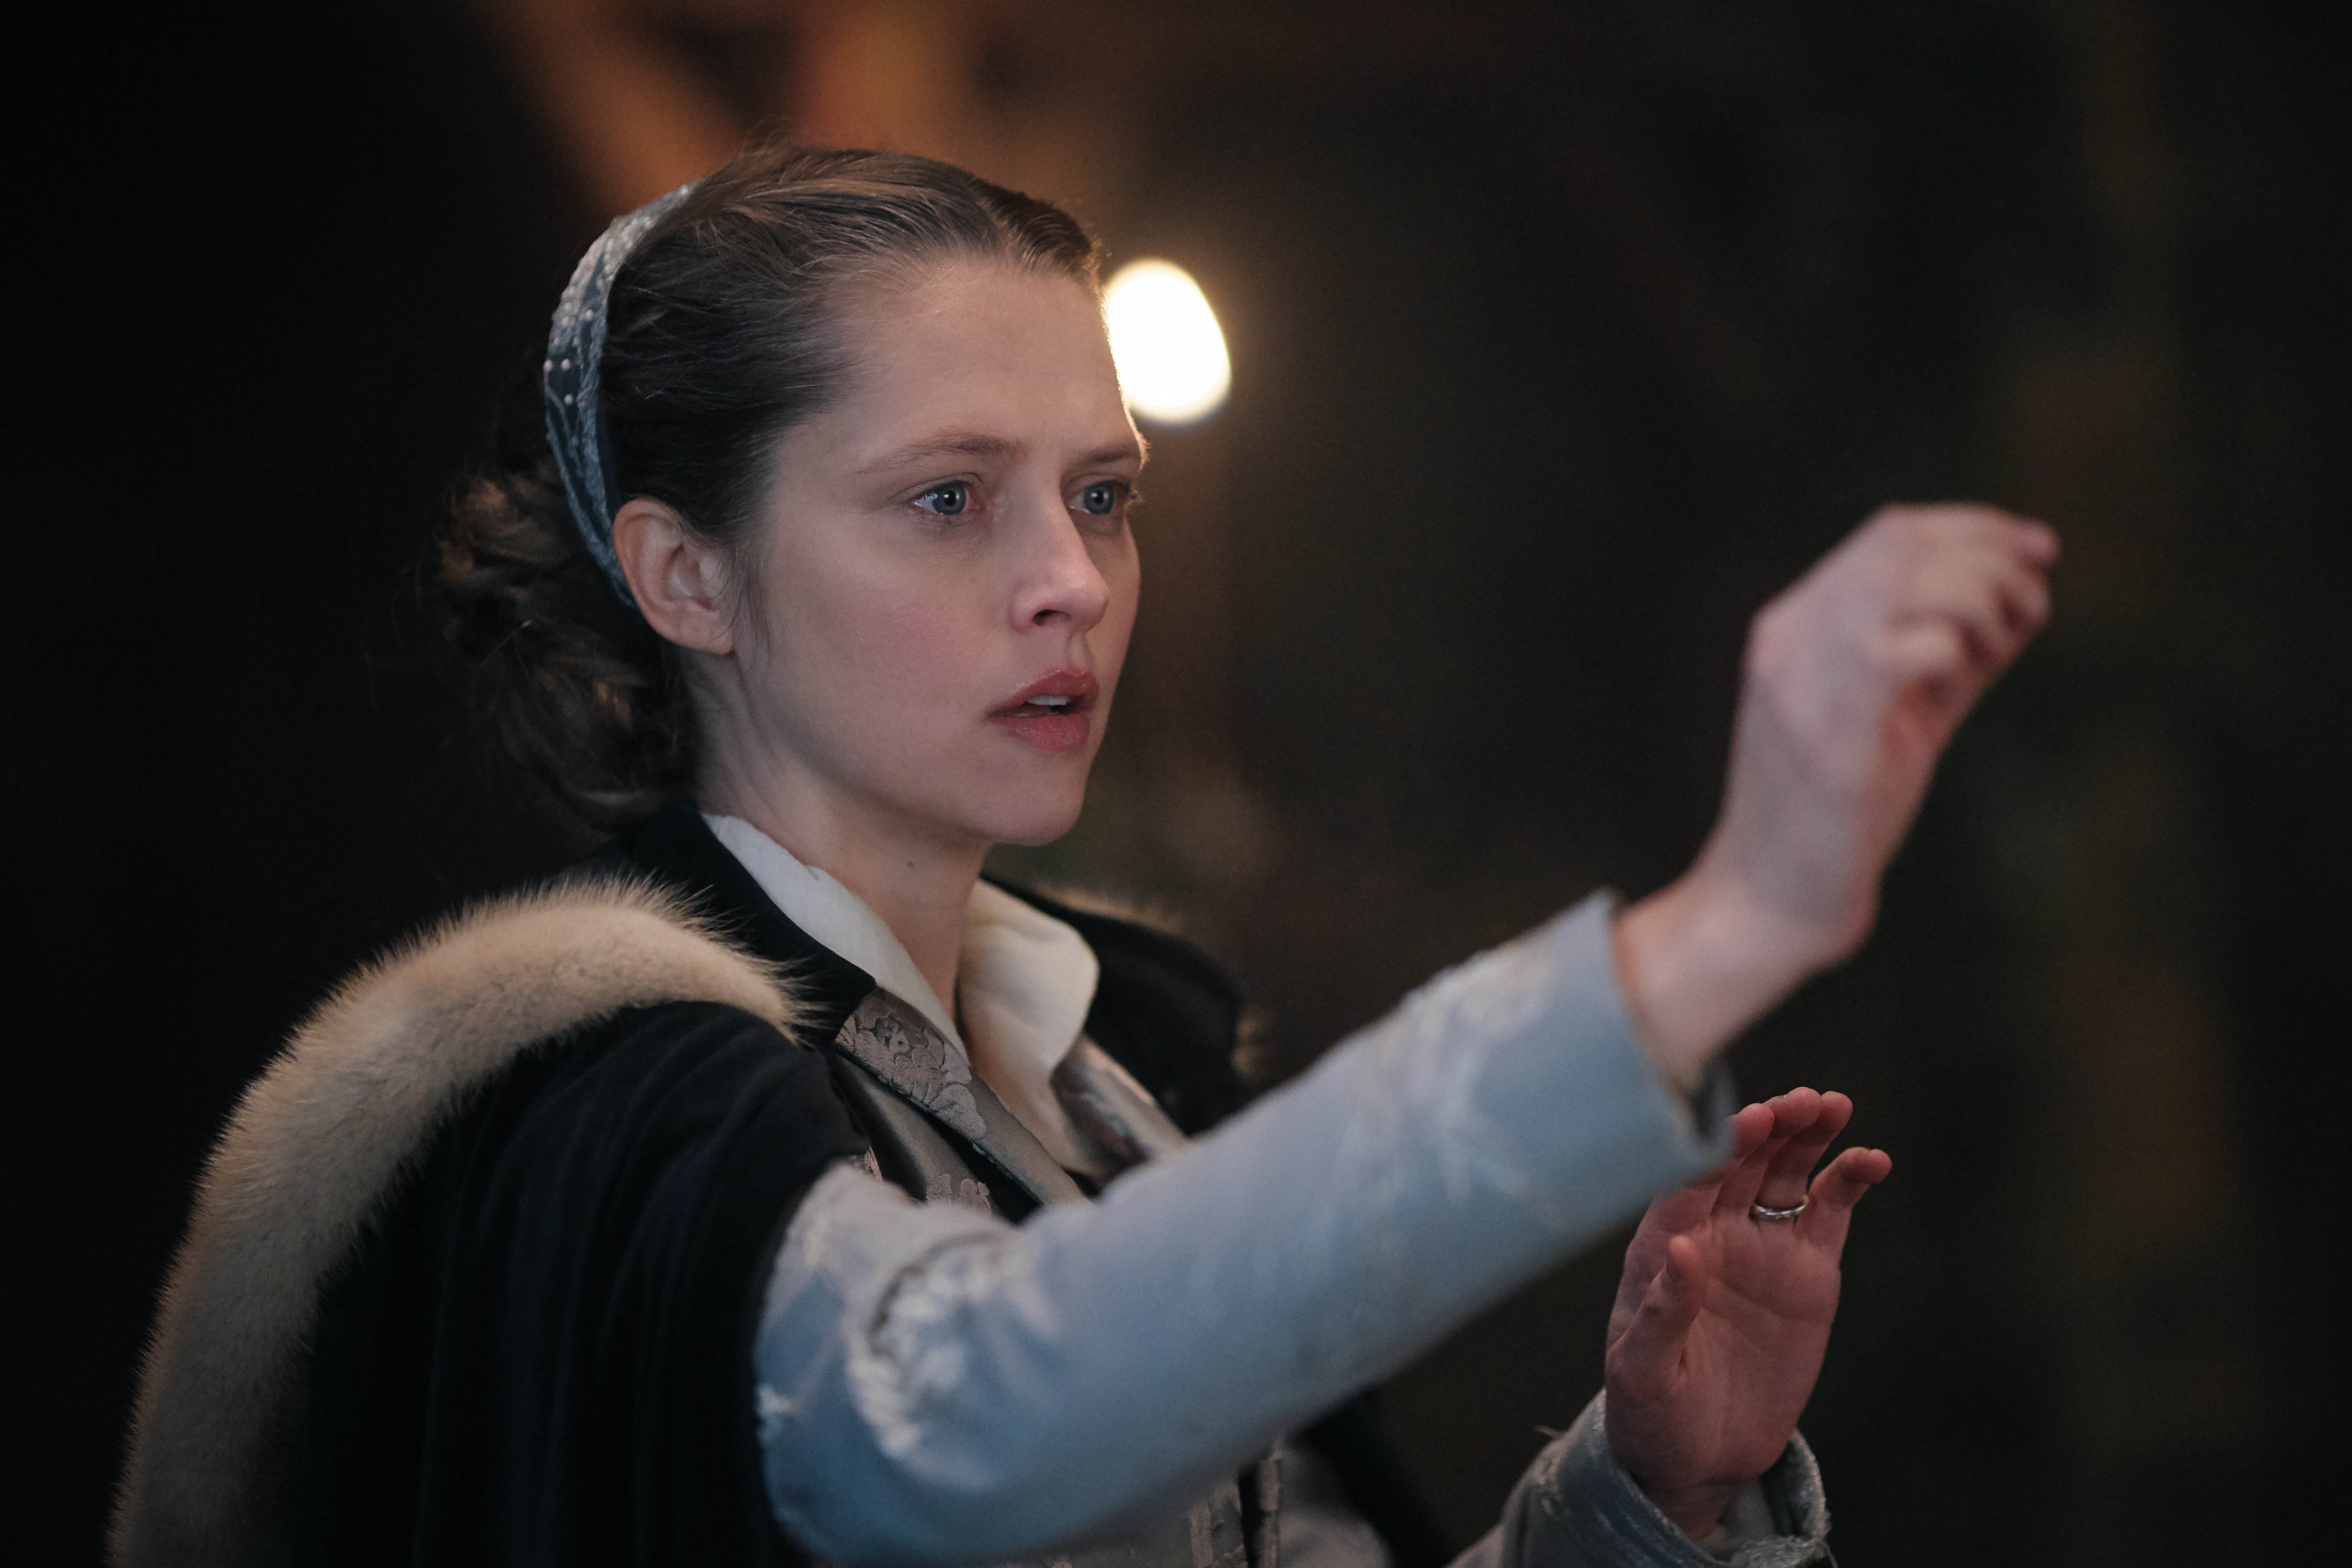 Diana Bishop, wearing a 16th century dress and doing magic in 'A Discovery of Witches'